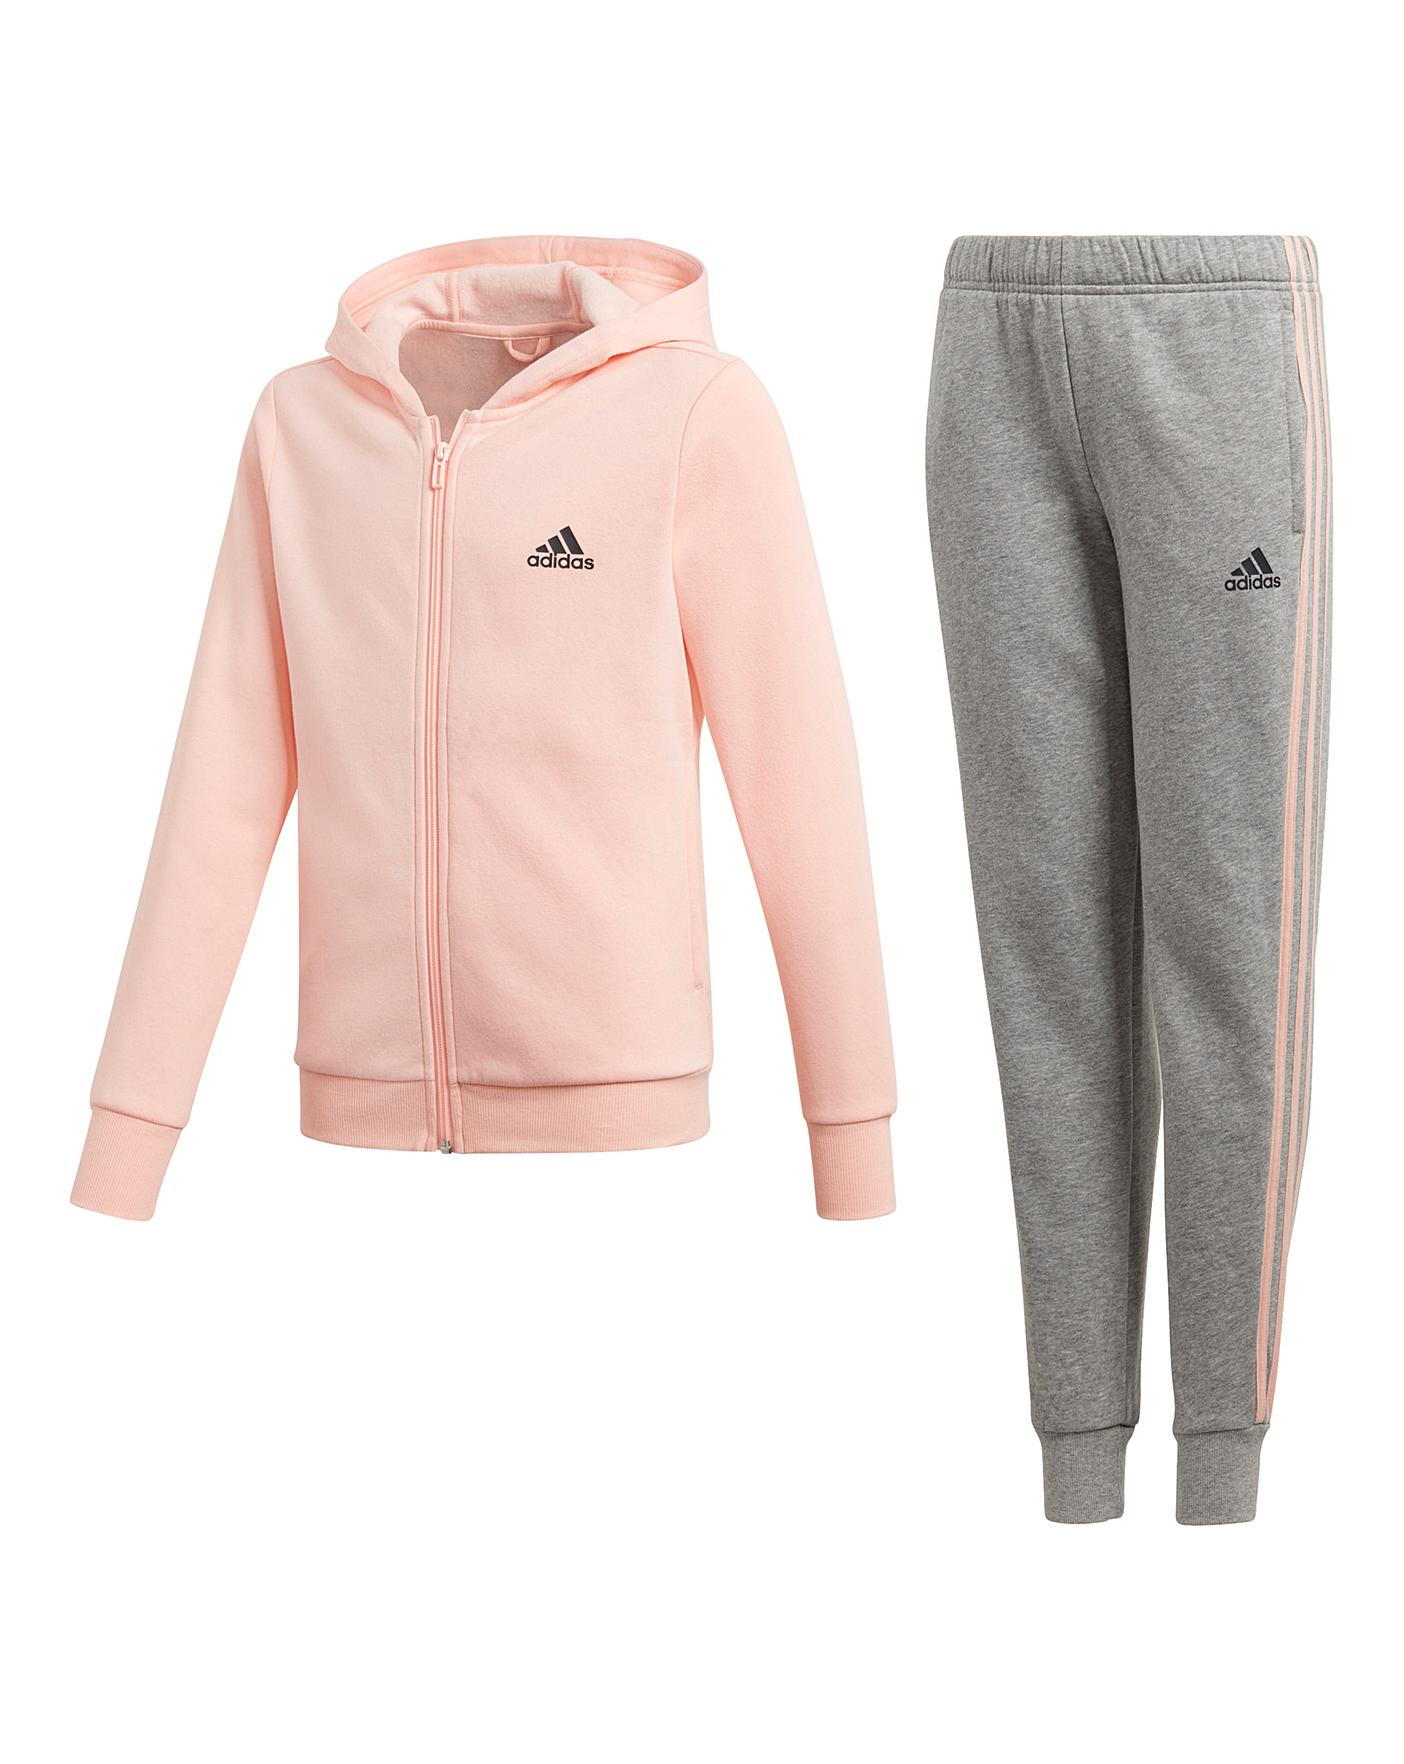 adidas youth track suit